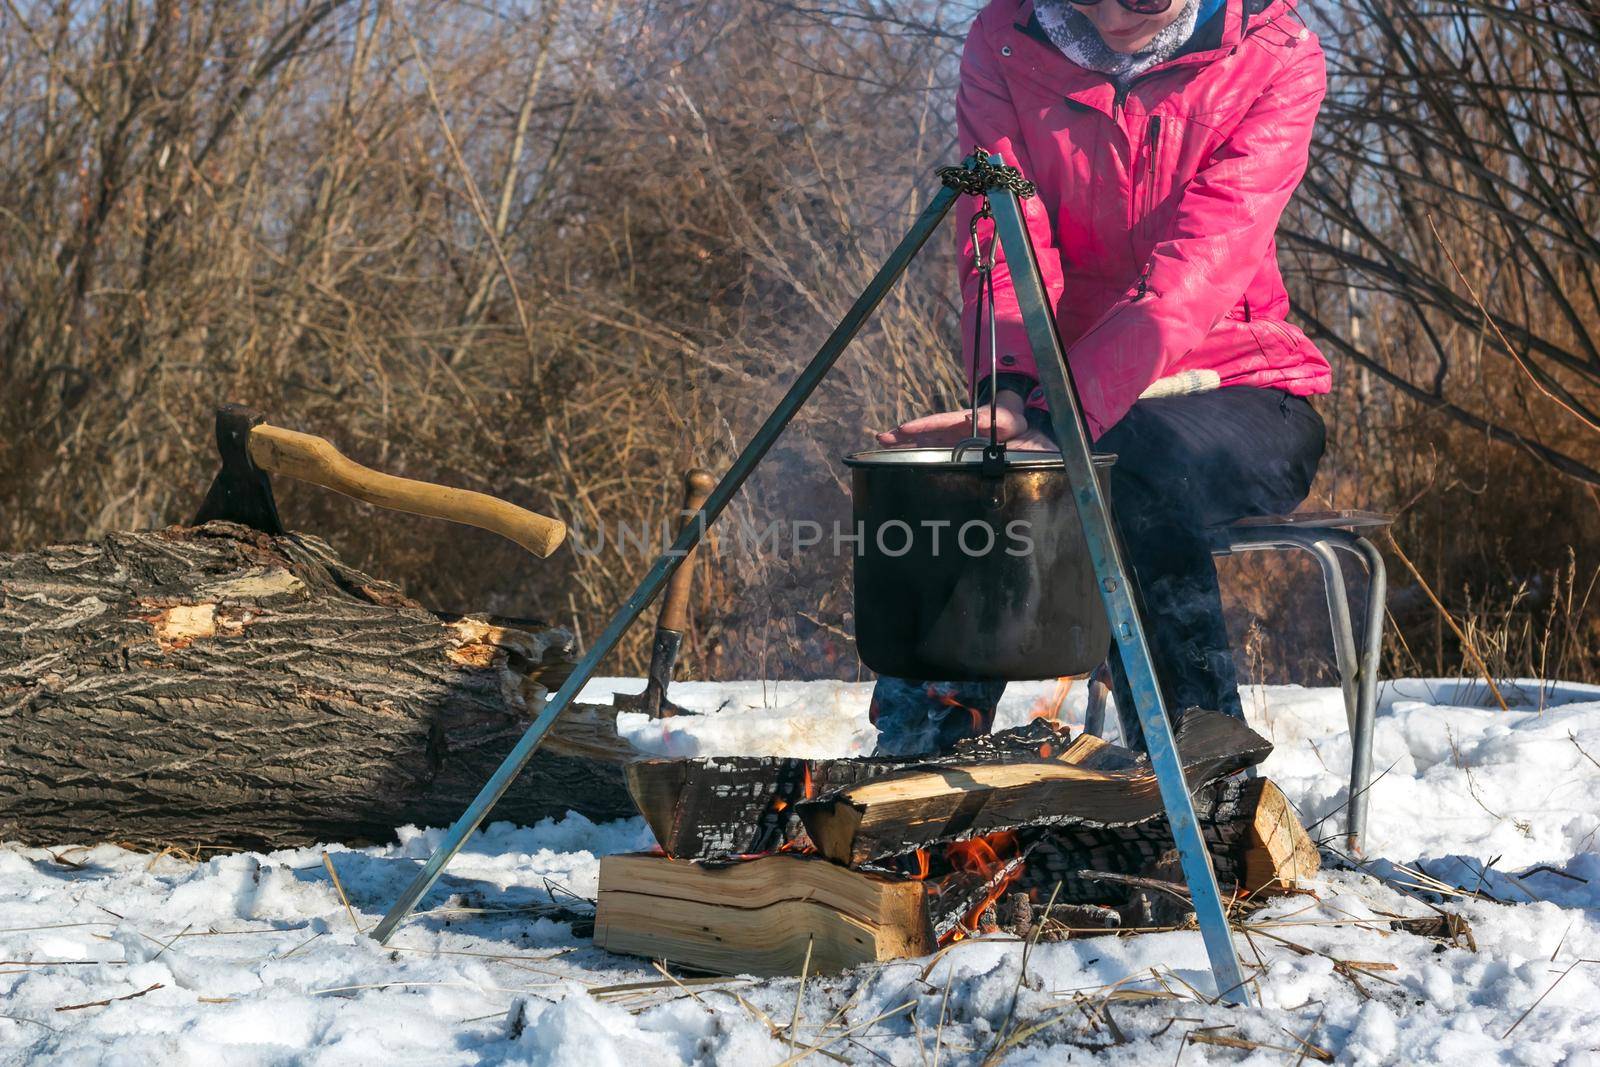 Female caucasian in pink jacket warms her hands by campfire, pot of soot over bonfire hanging on tripod, ax in tree trunk on backdrop, winter outdoor cooking at campsite, lifestyle